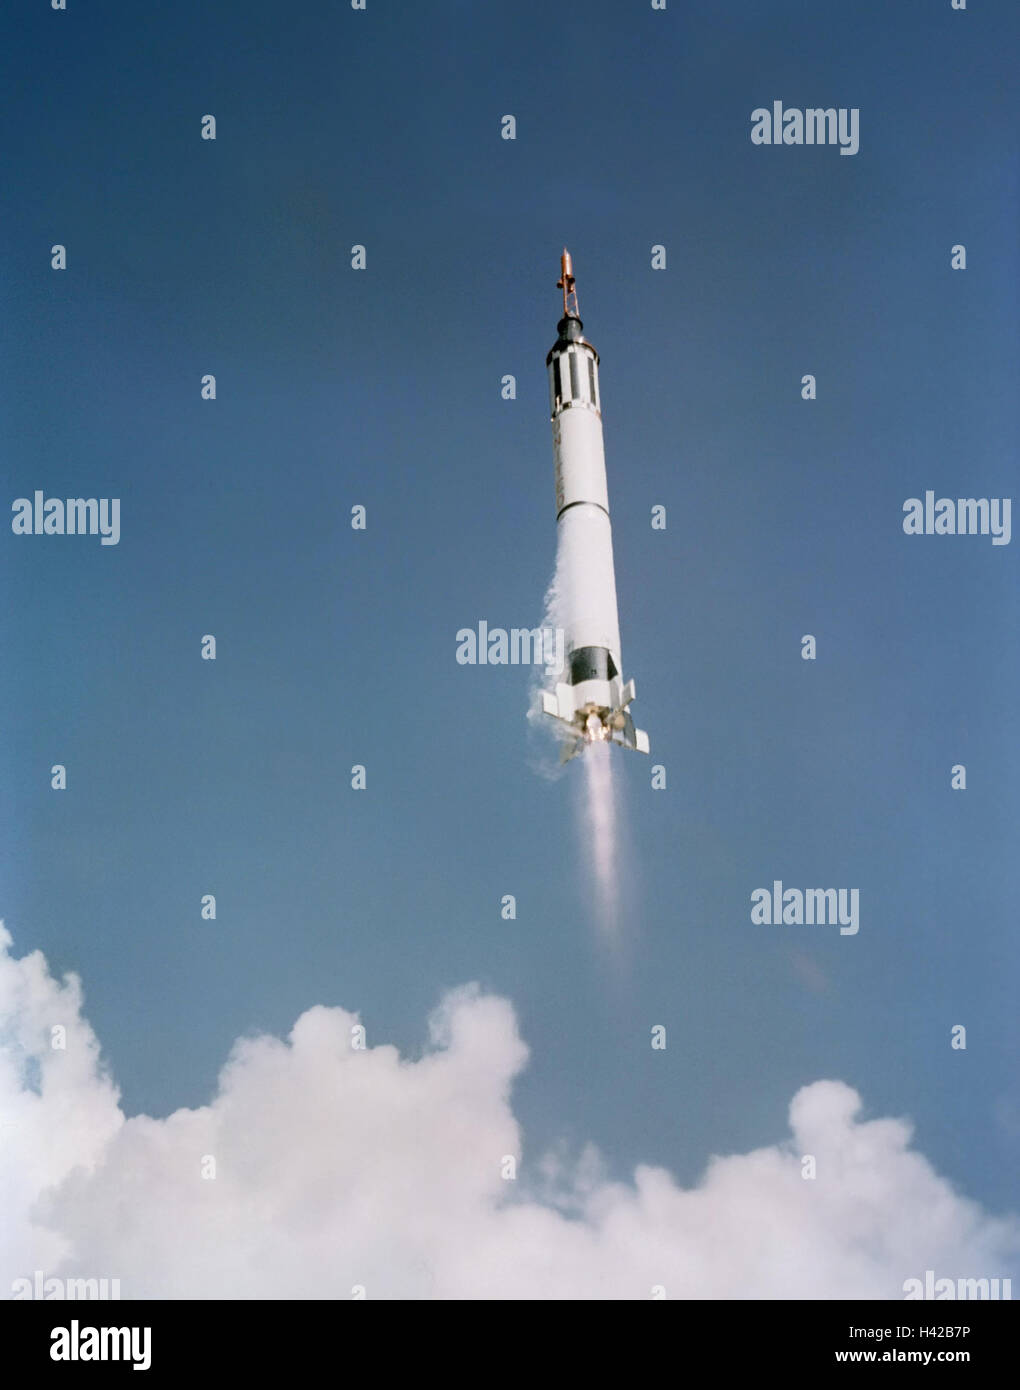 The Mercury Redstone capsule carrying NASA astronaut Alan Shepard and the Freedom 7 spacecraft blasts off from the launch pad May 5, 1961 in Cape Canaveral, Florida. The flight marked the first time an American flew into space. Stock Photo